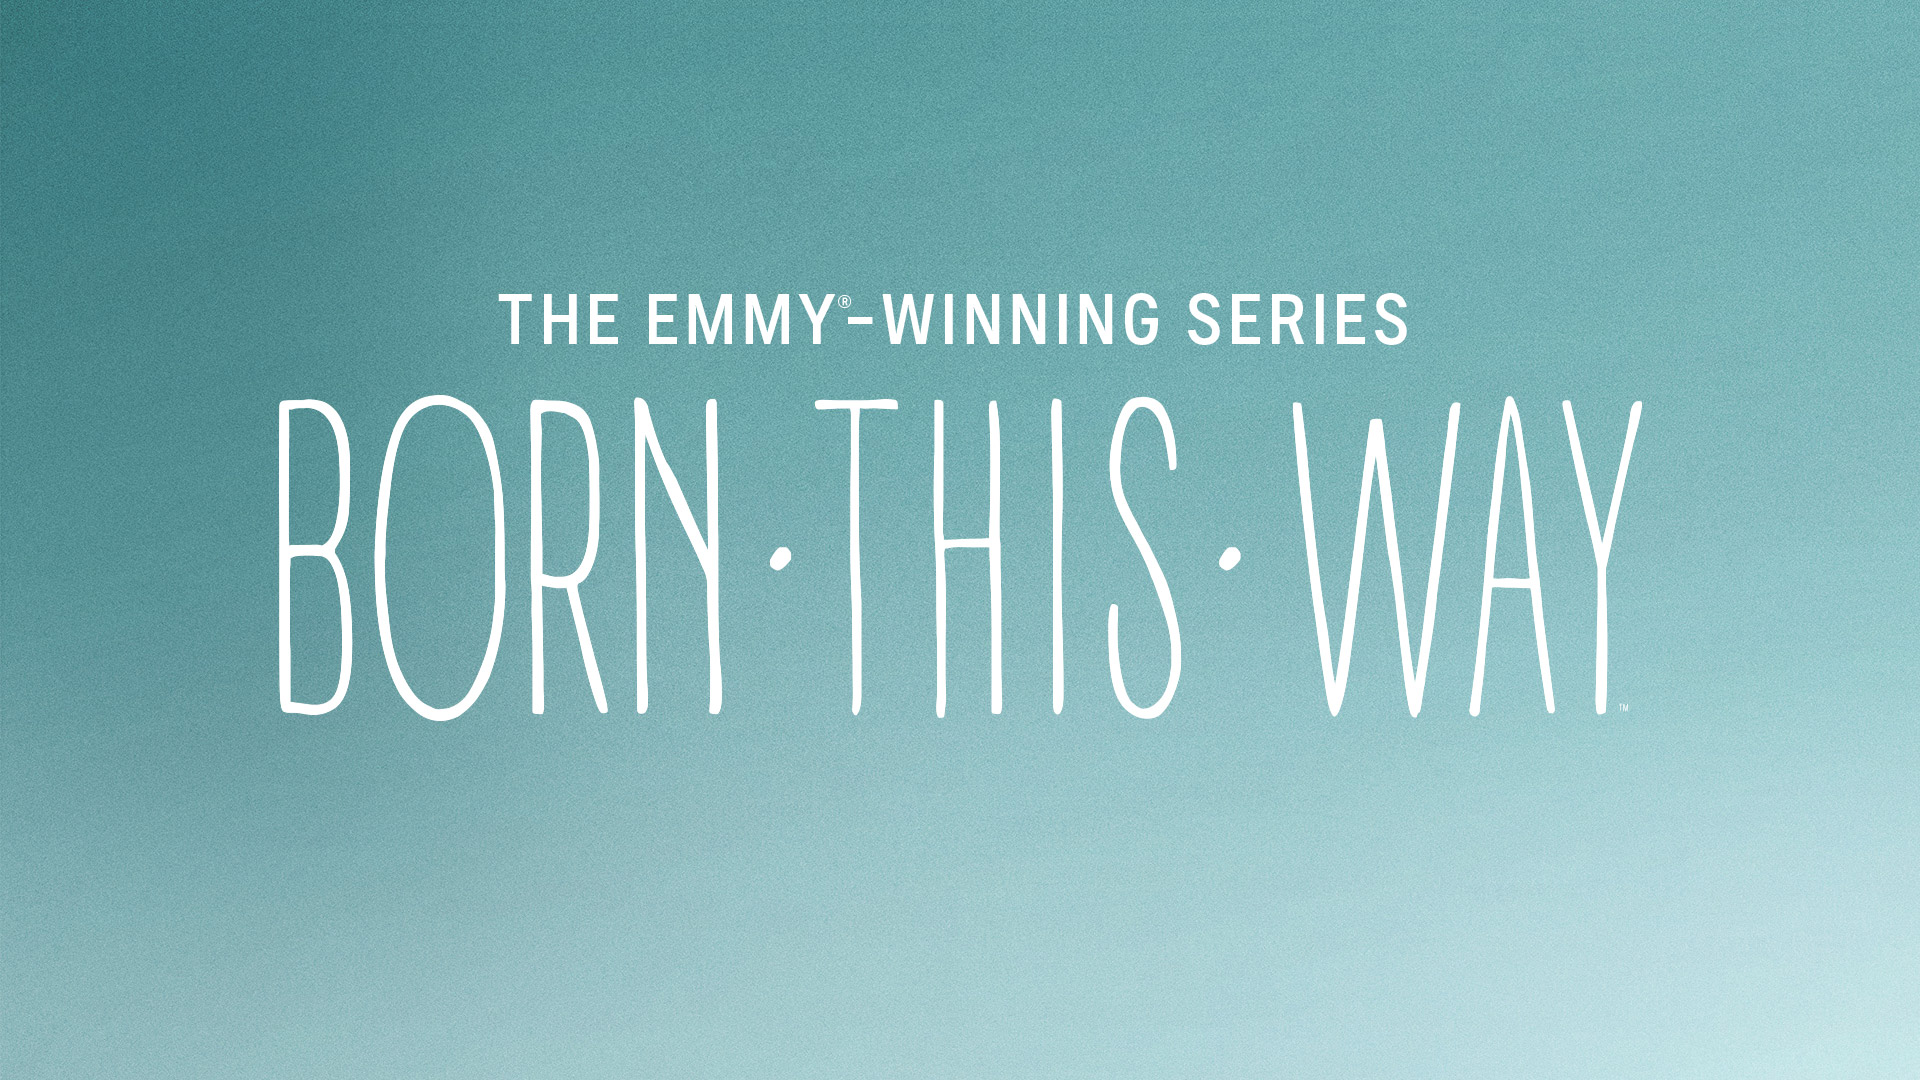 A&E Network's Emmy®-Winning Docuseries "Born This Way" Renewed for a Third Season